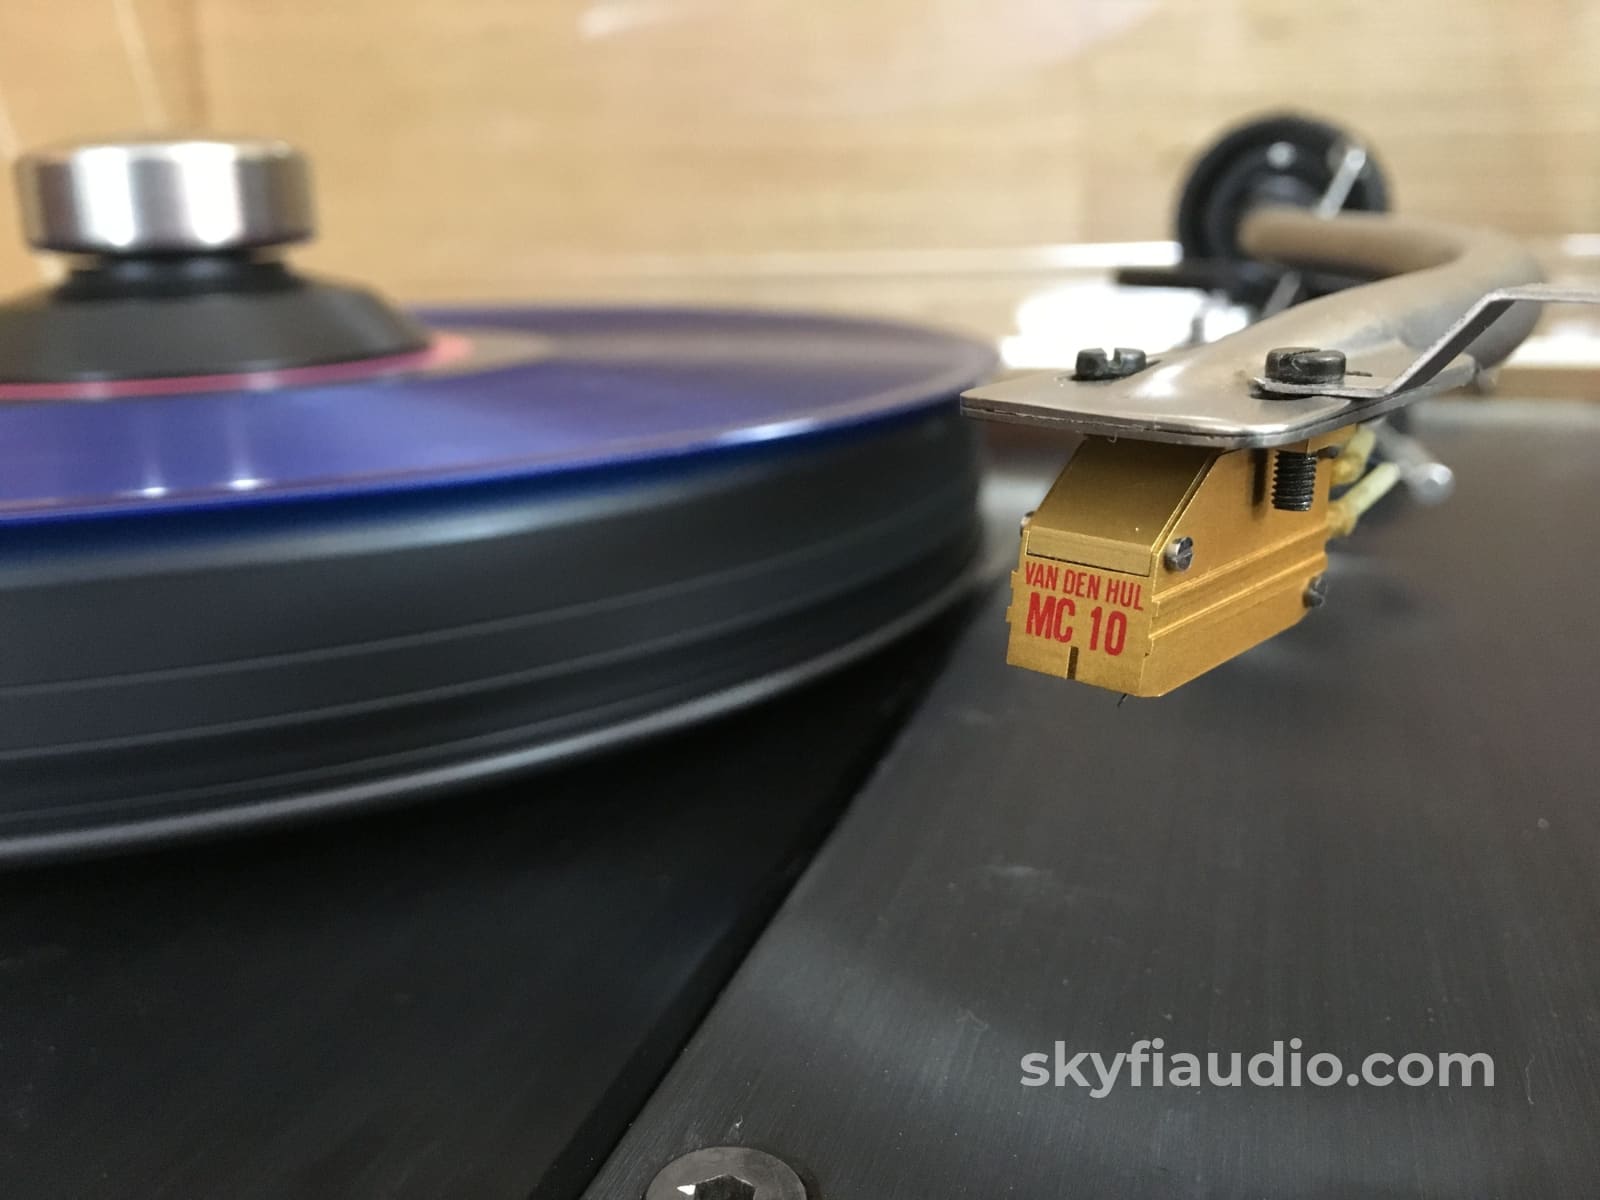 Vpi Industries Hw-19 Turntable With Upgrades And New Grado Cartridge